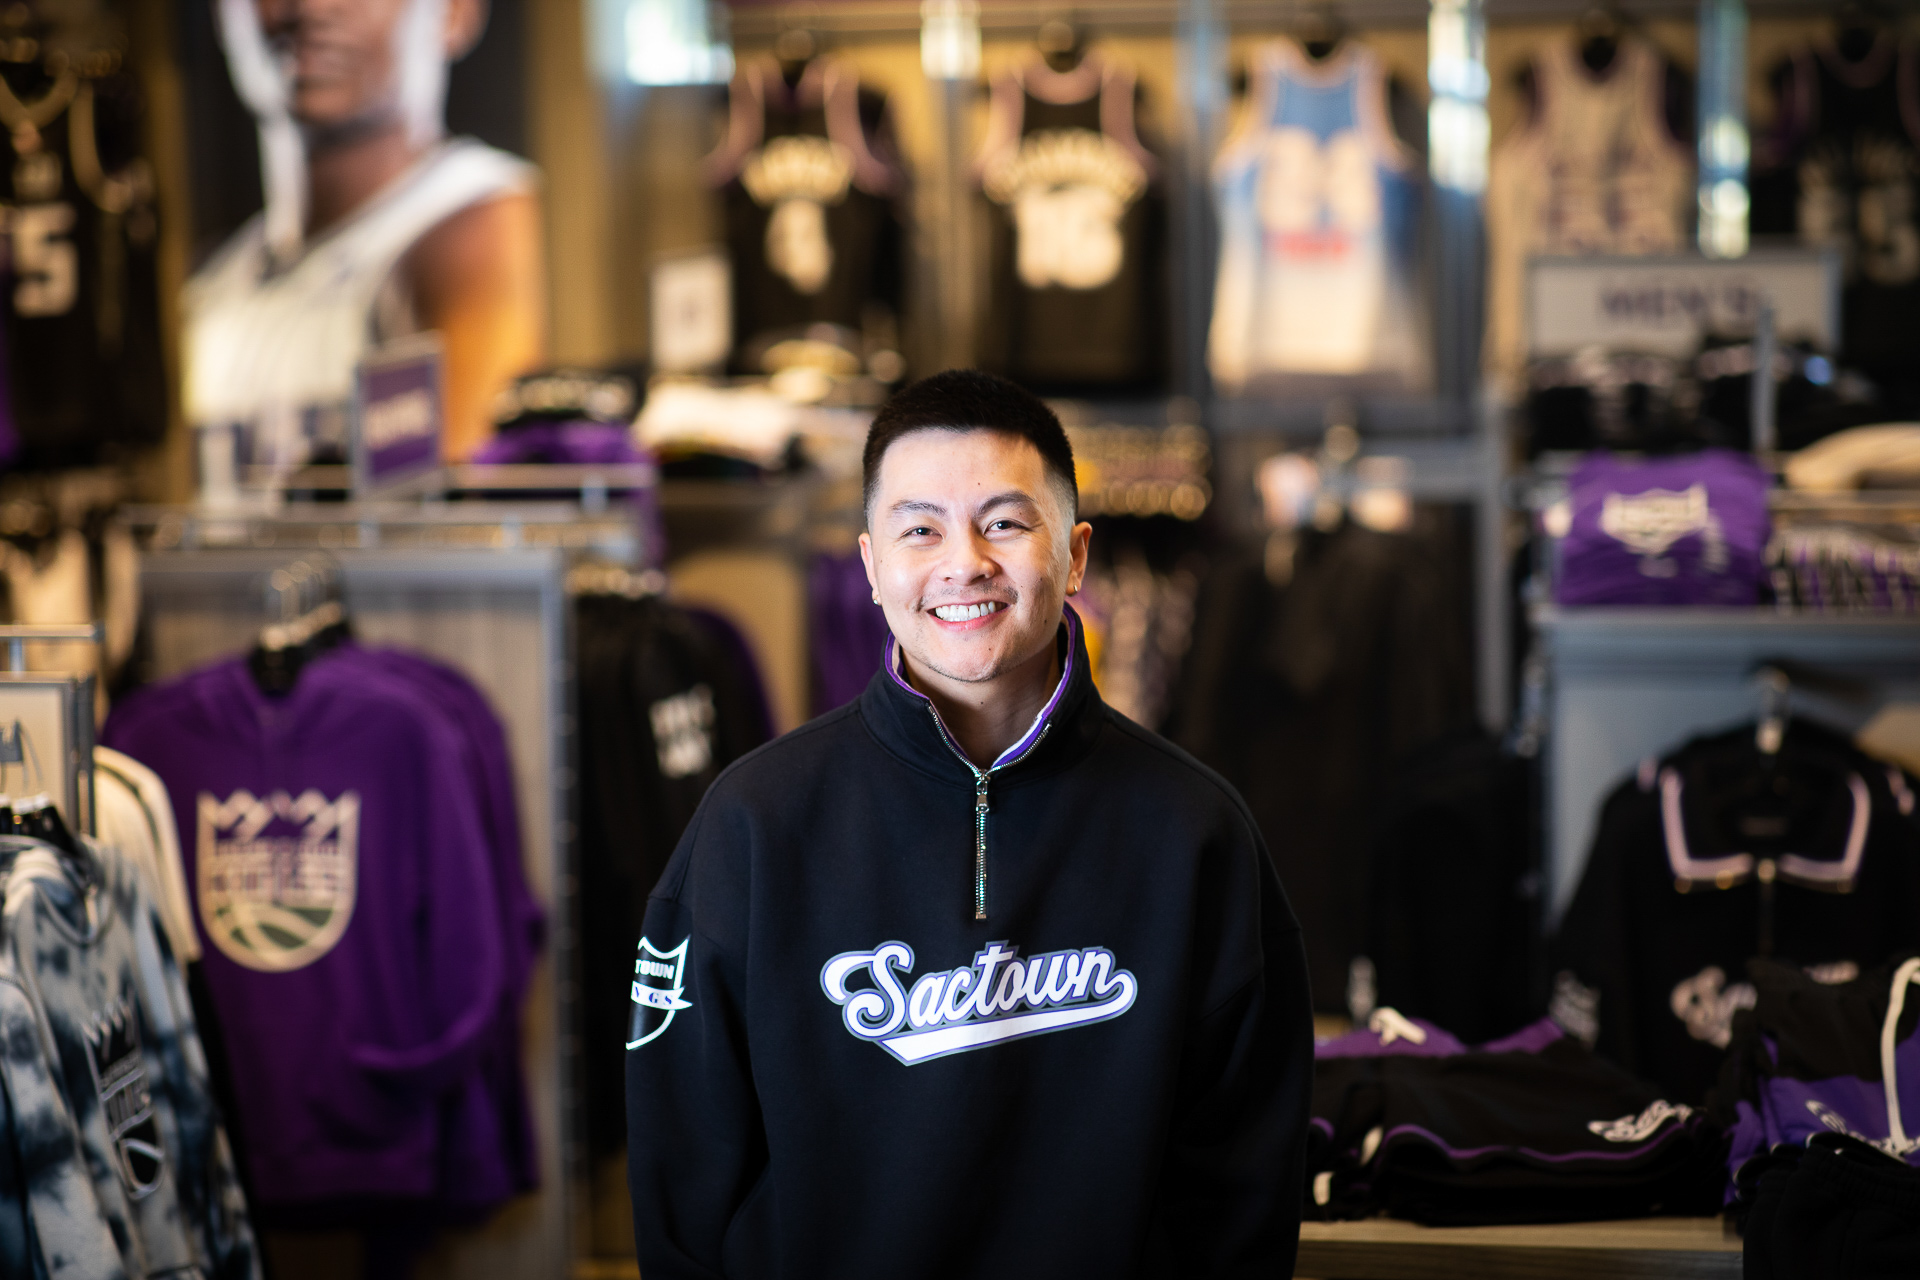 Jason Vu, founder and creative director of AUTHMADE, a men’s clothing line that specializes in apparel for the Sacramento Kings and other NBA teams, poses in the Kings Team Store wearing one of his sweatshirts that reads "Sactown" in stylized blue font.